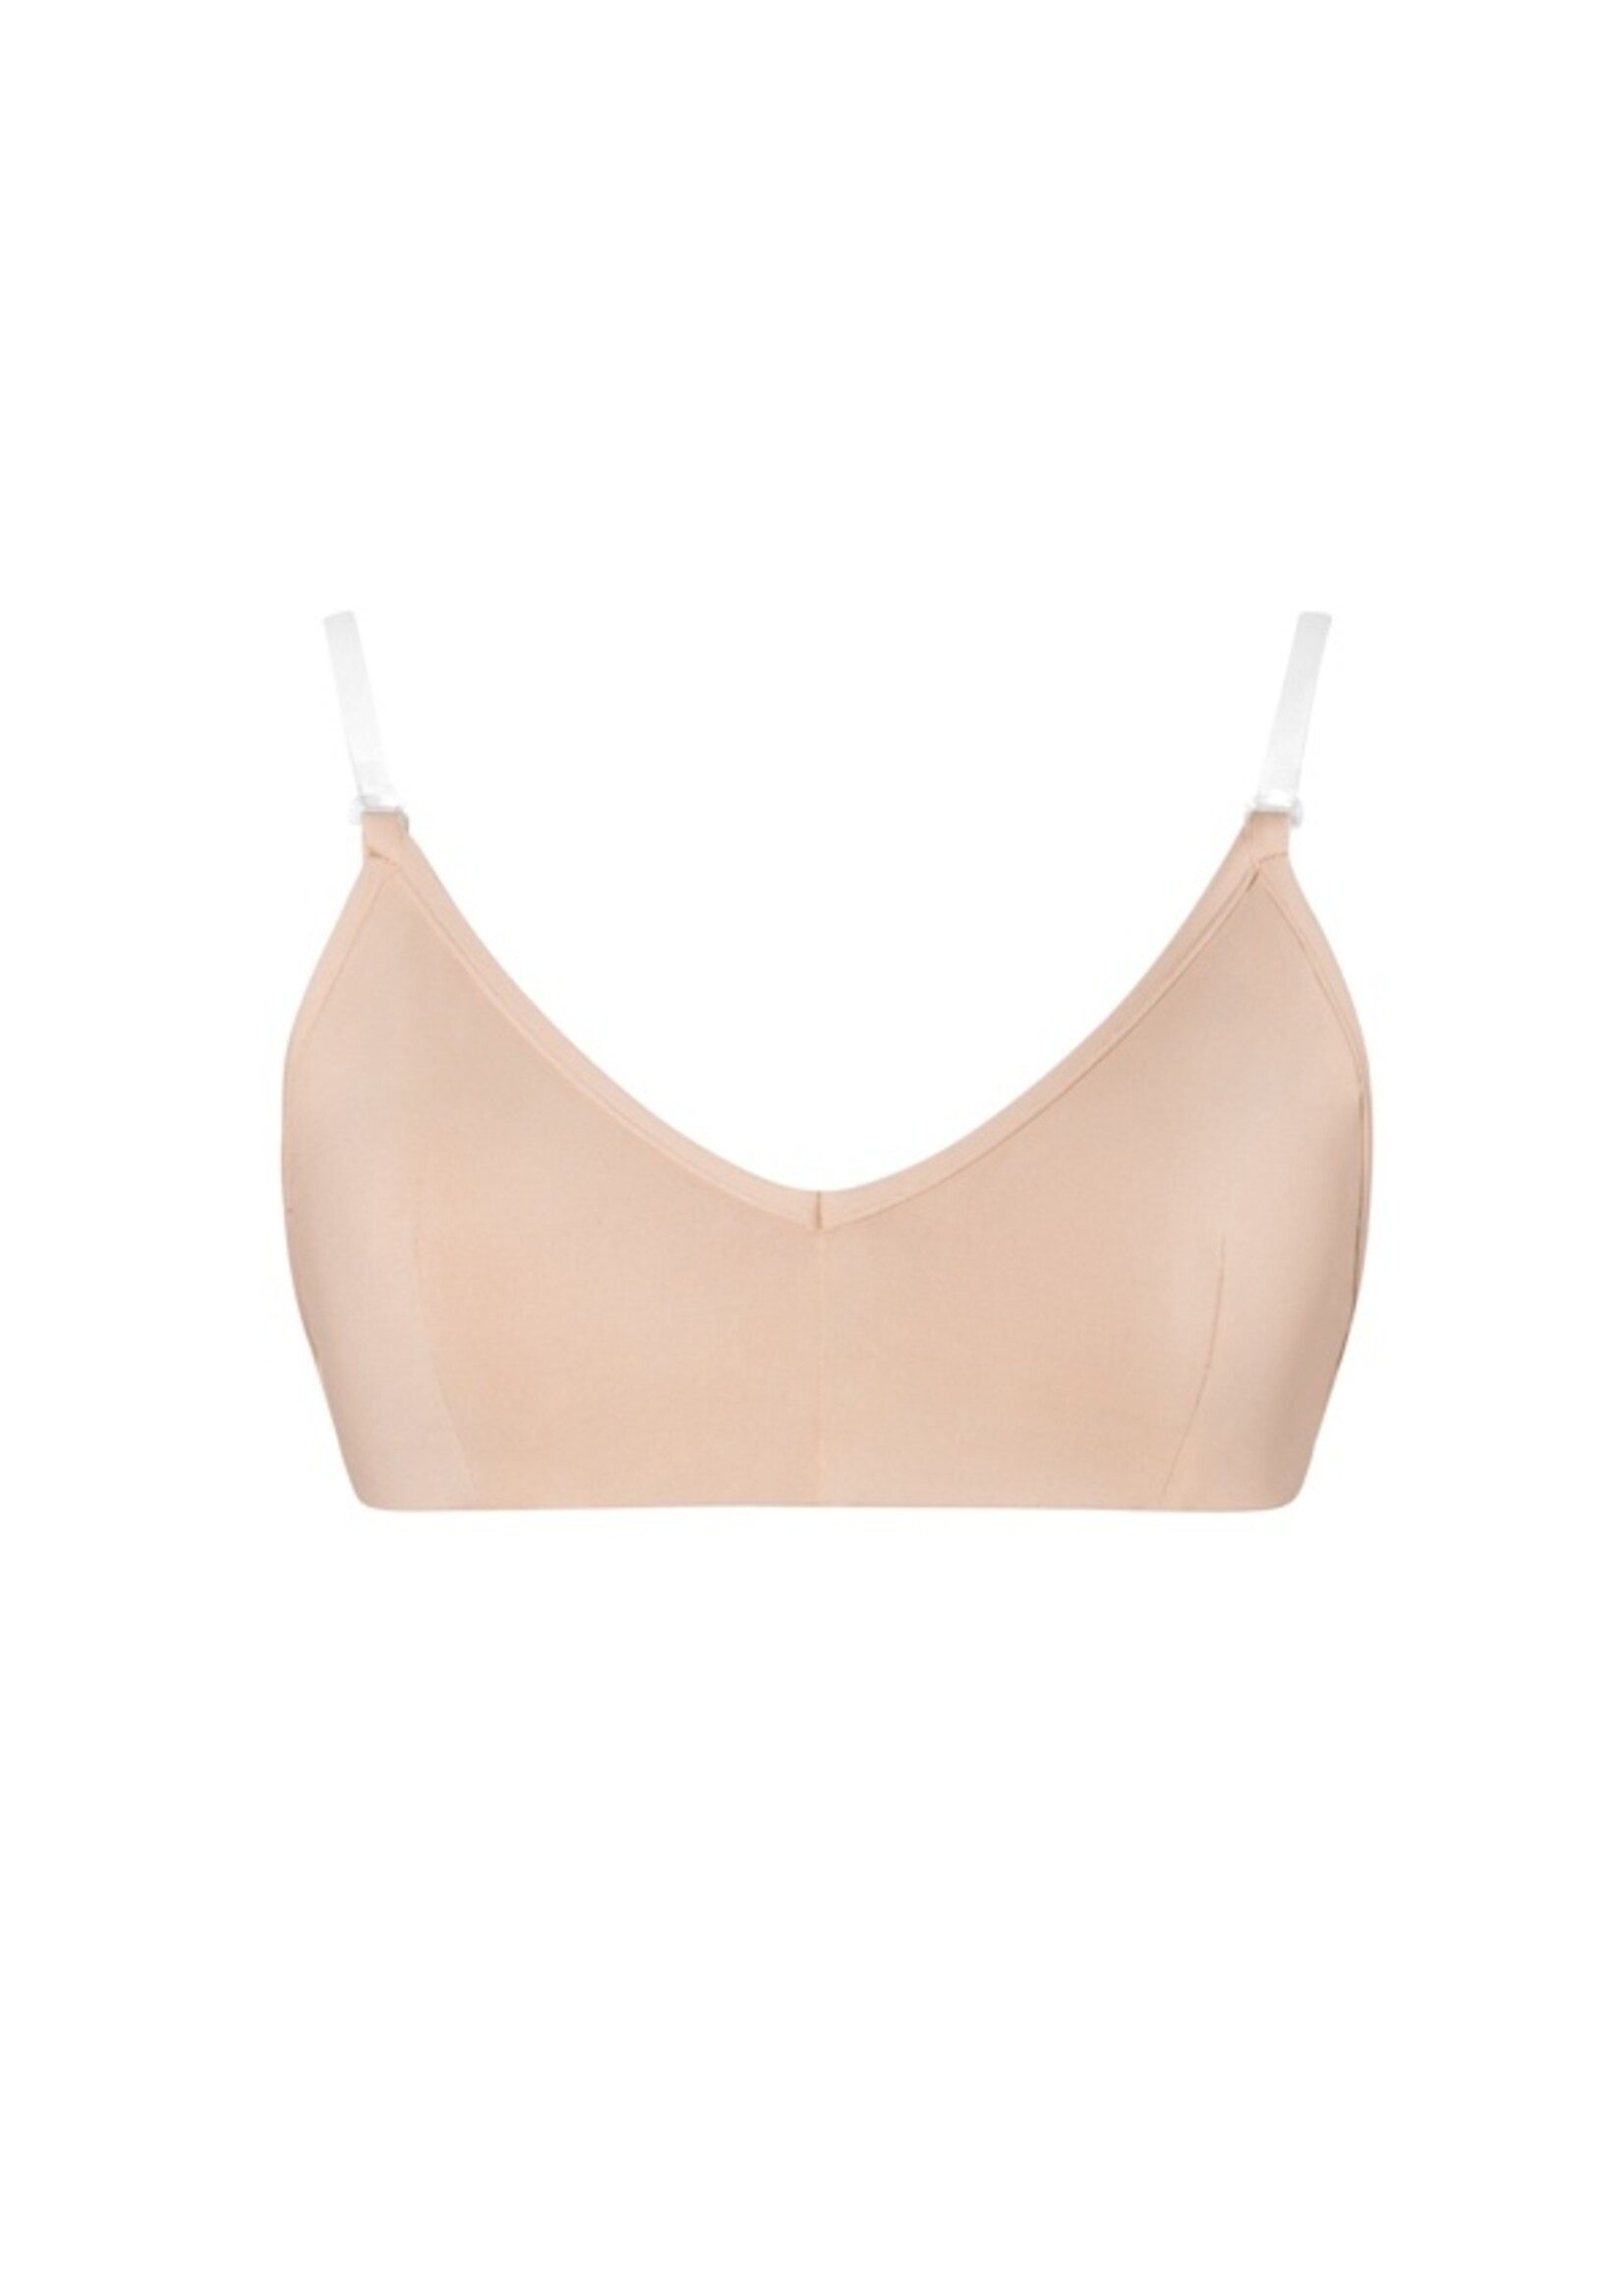 ENERGETIKS CB29 CHILDRENS SKIN TONE BRA WITH REMOVABLE CUPS, CLEAR BACK & STRAPS